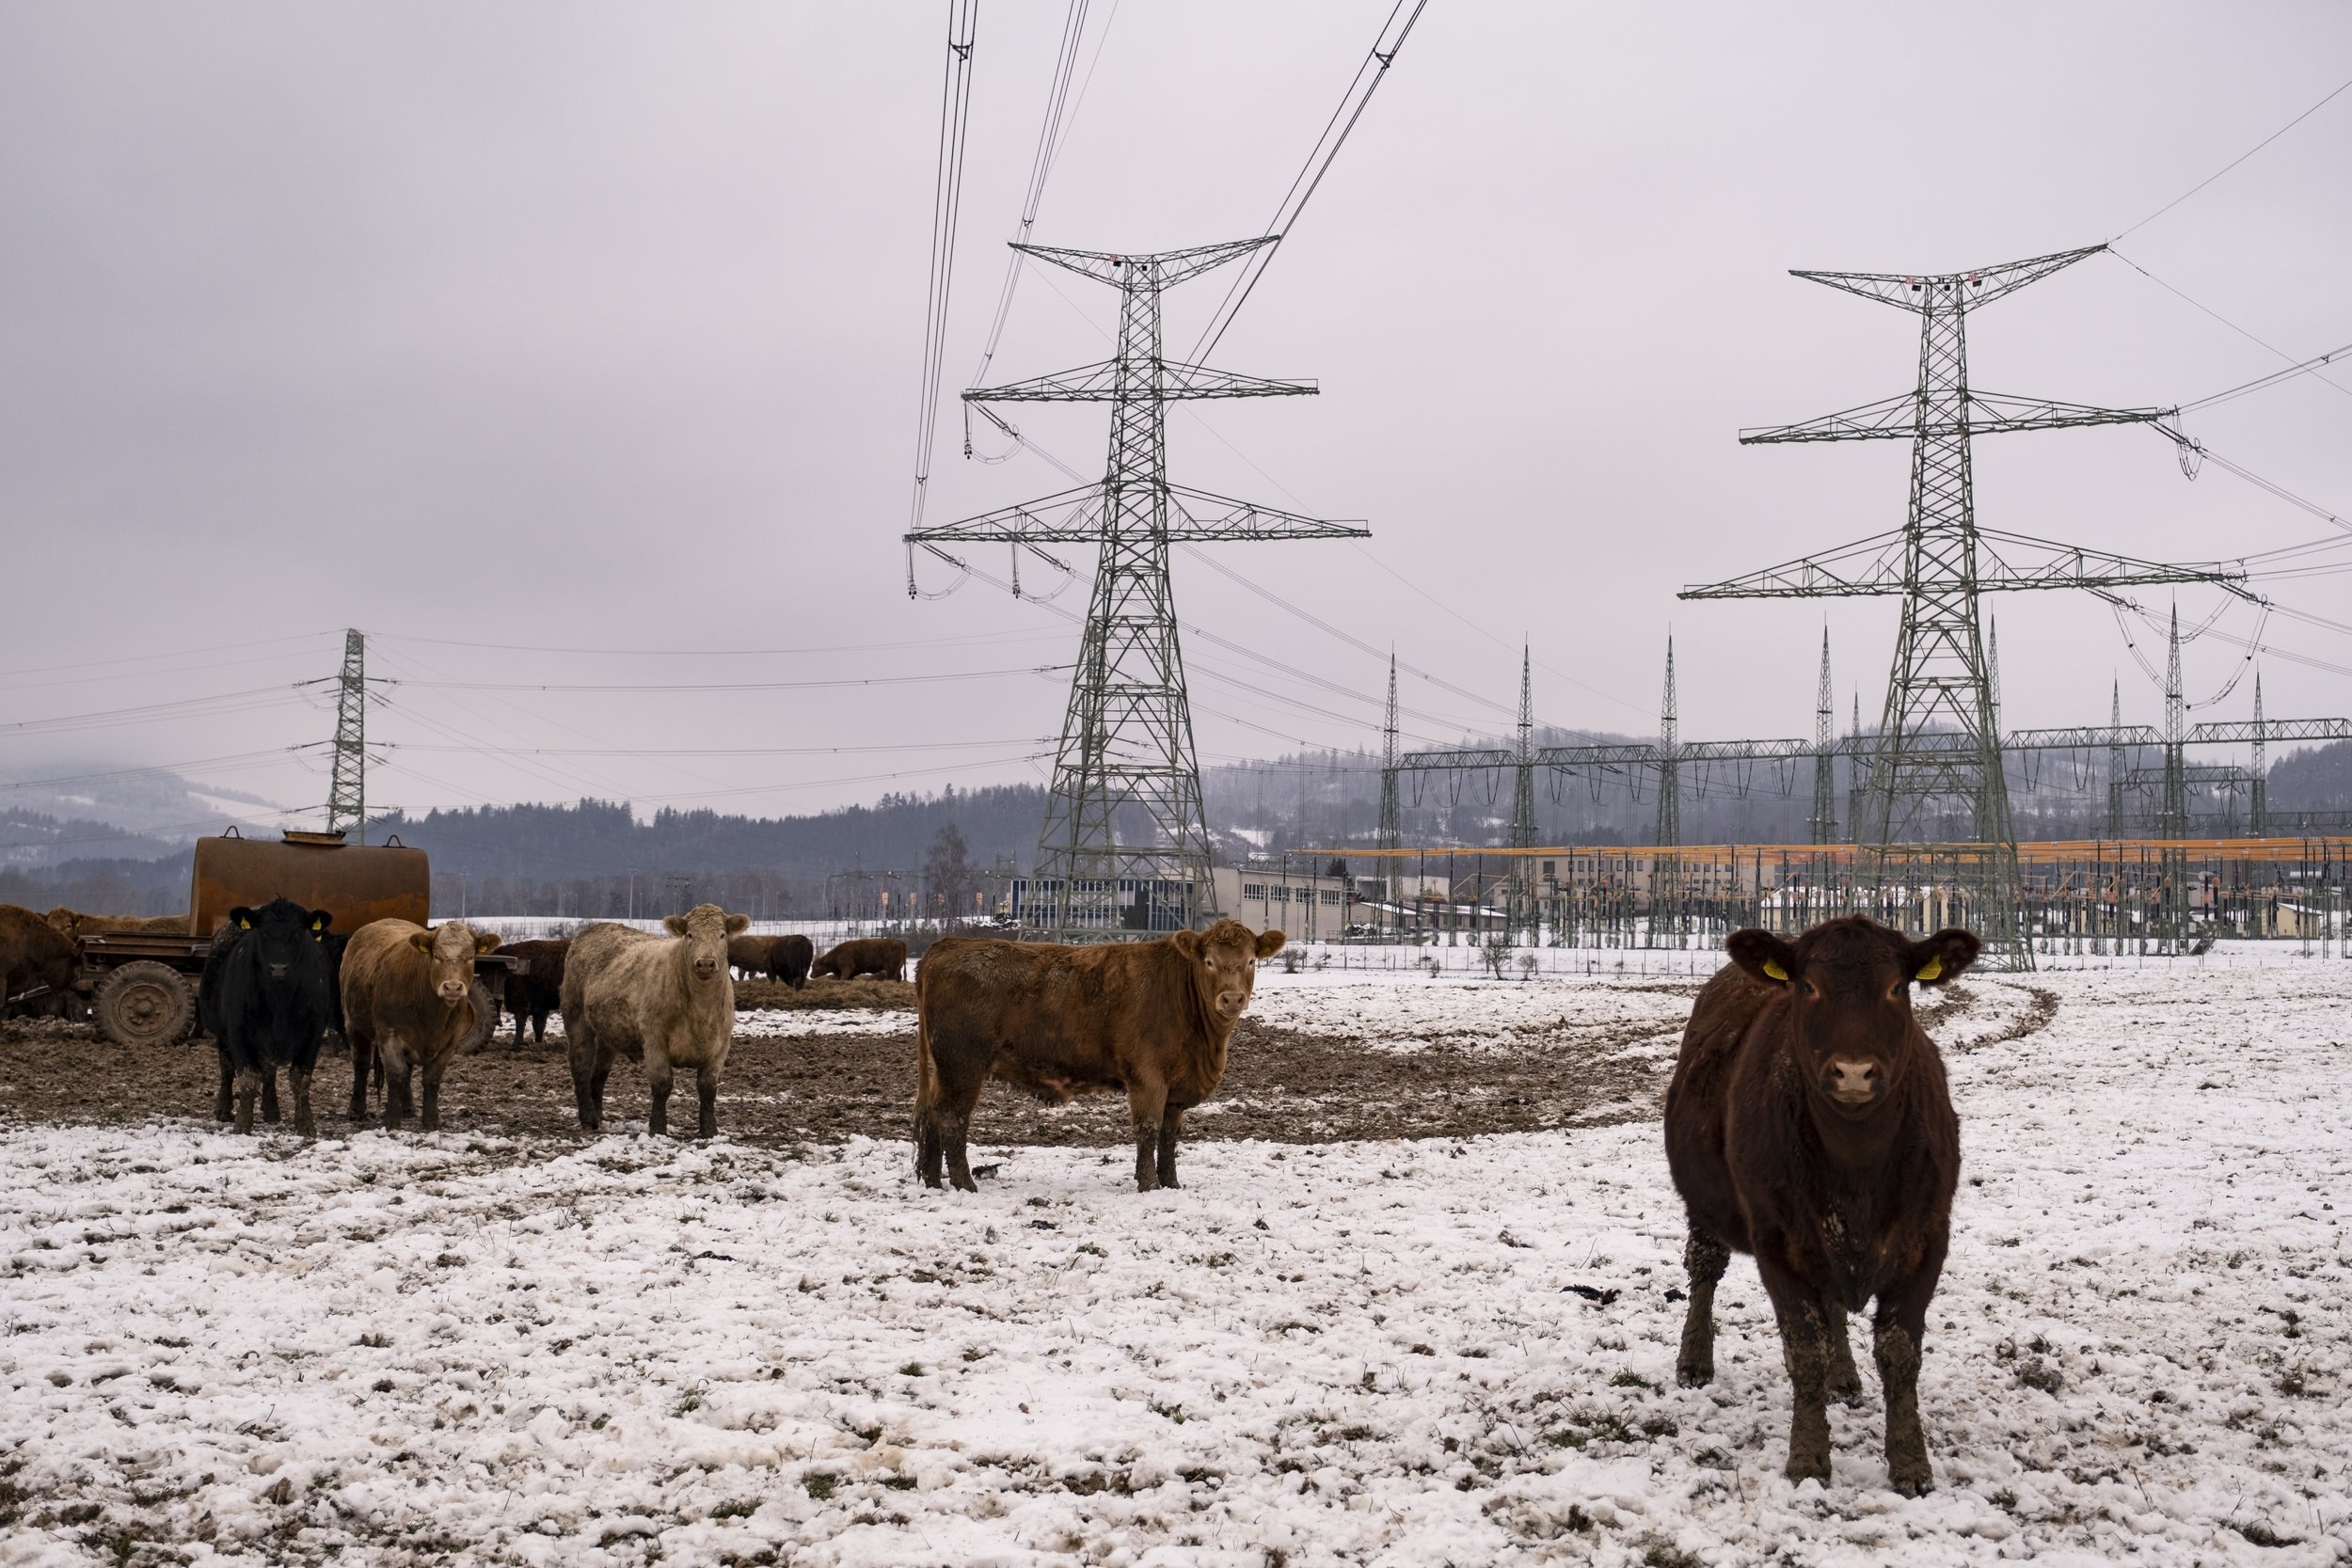  Cows are grazing right next to an electrical substation that distributes electric power from medium and high voltage networks to residential and industrial buildings. 